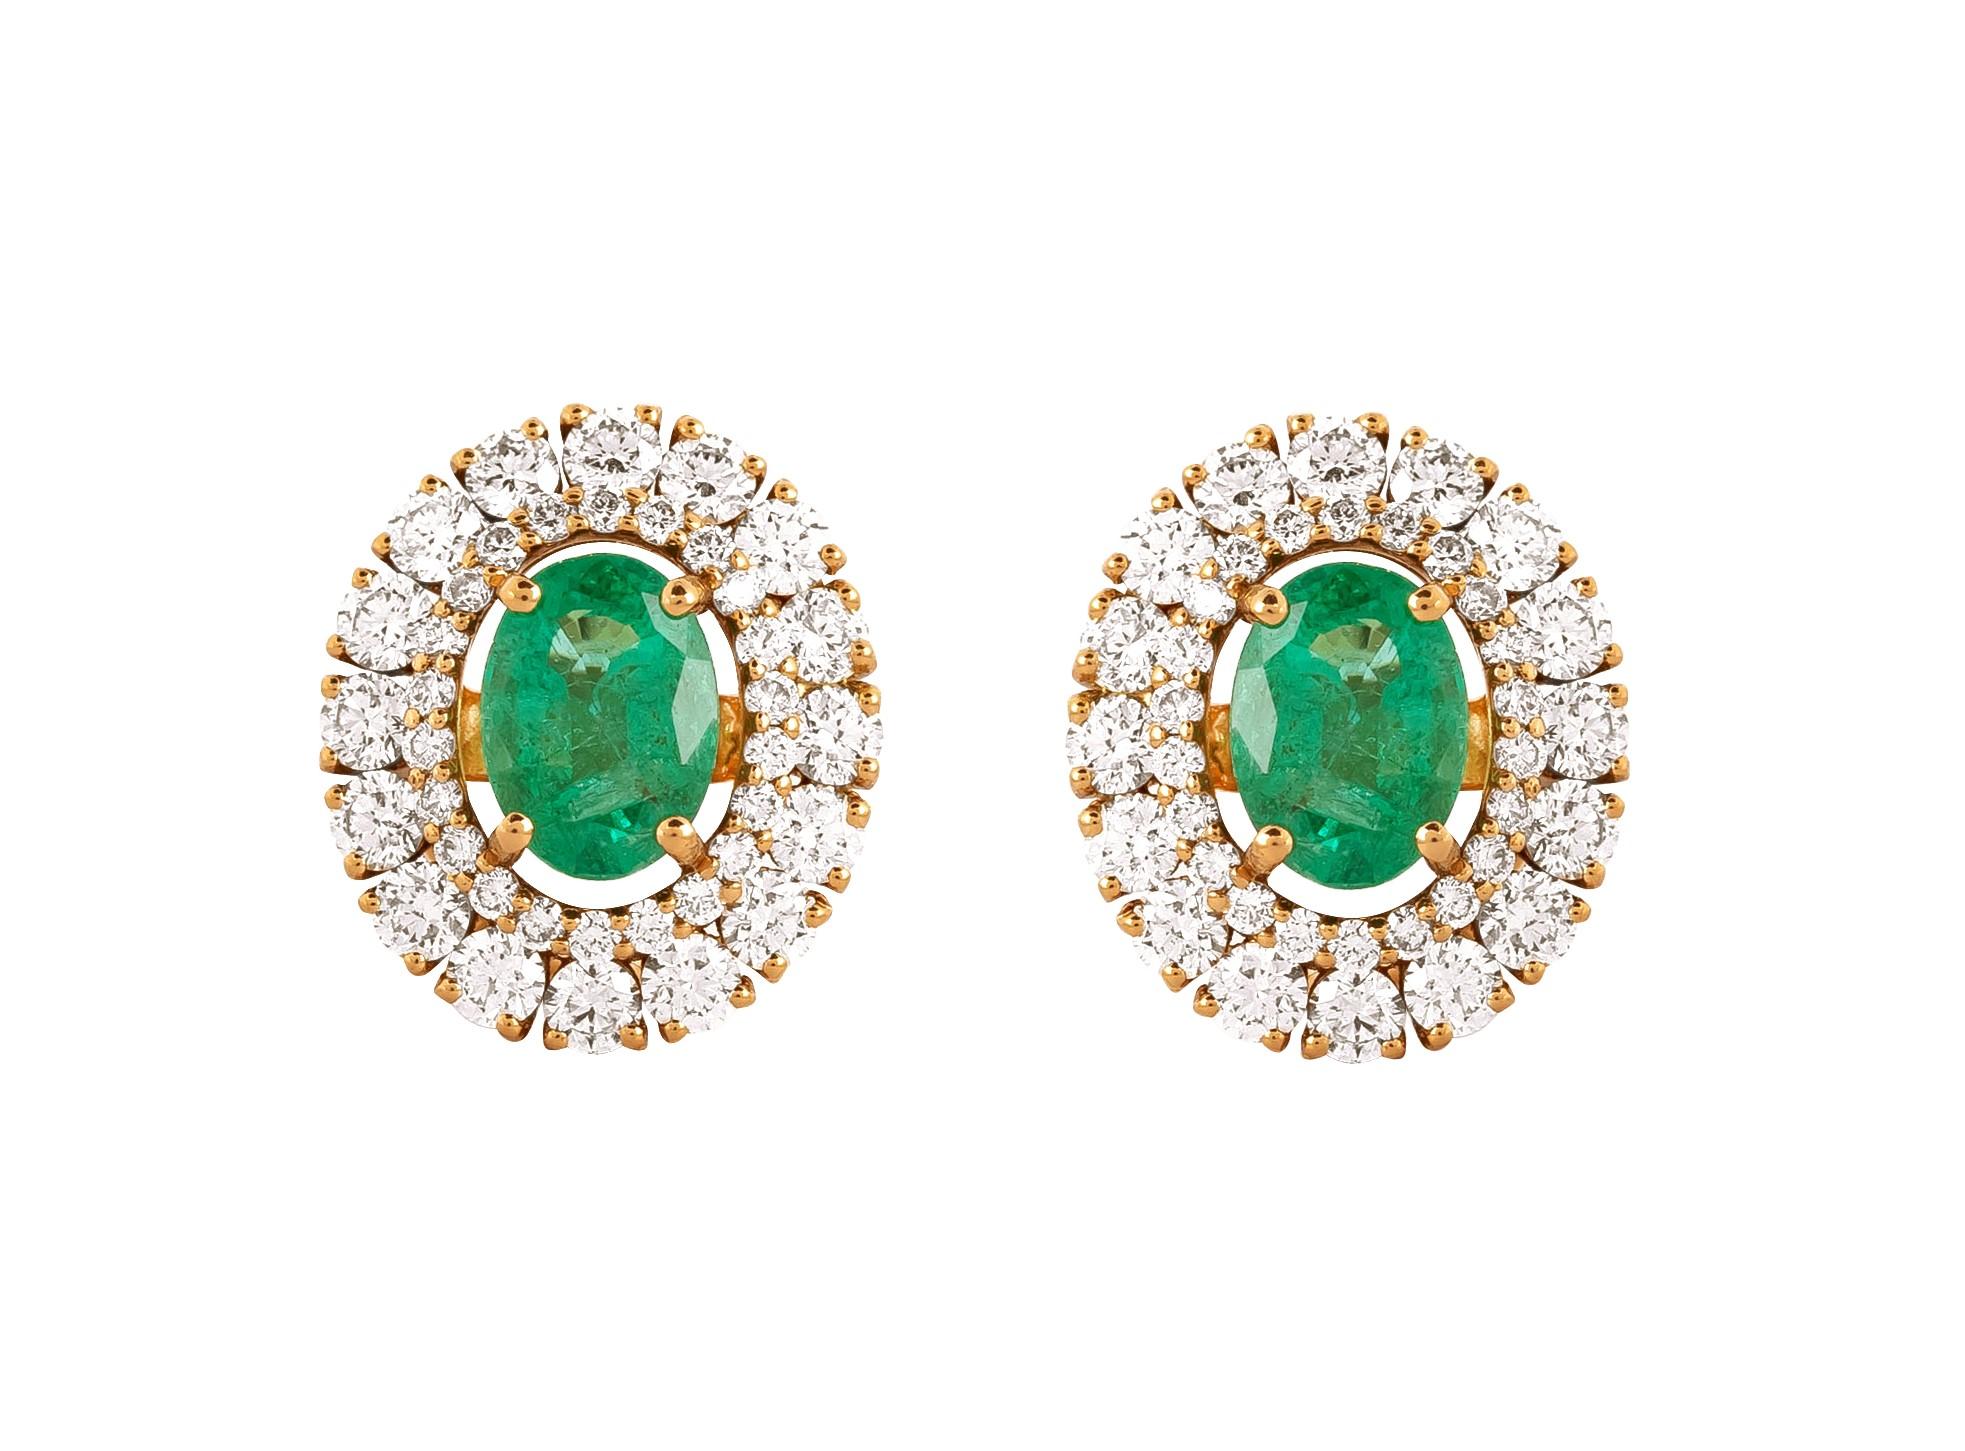 Enter the world of refined elegance with our 18 Karat Gold 2.79 Carat Diamond and Emerald Solitaire Stud Earrings. Each piece stands as a testament to exquisite craftsmanship and meticulous curation, seamlessly blending tradition with modern